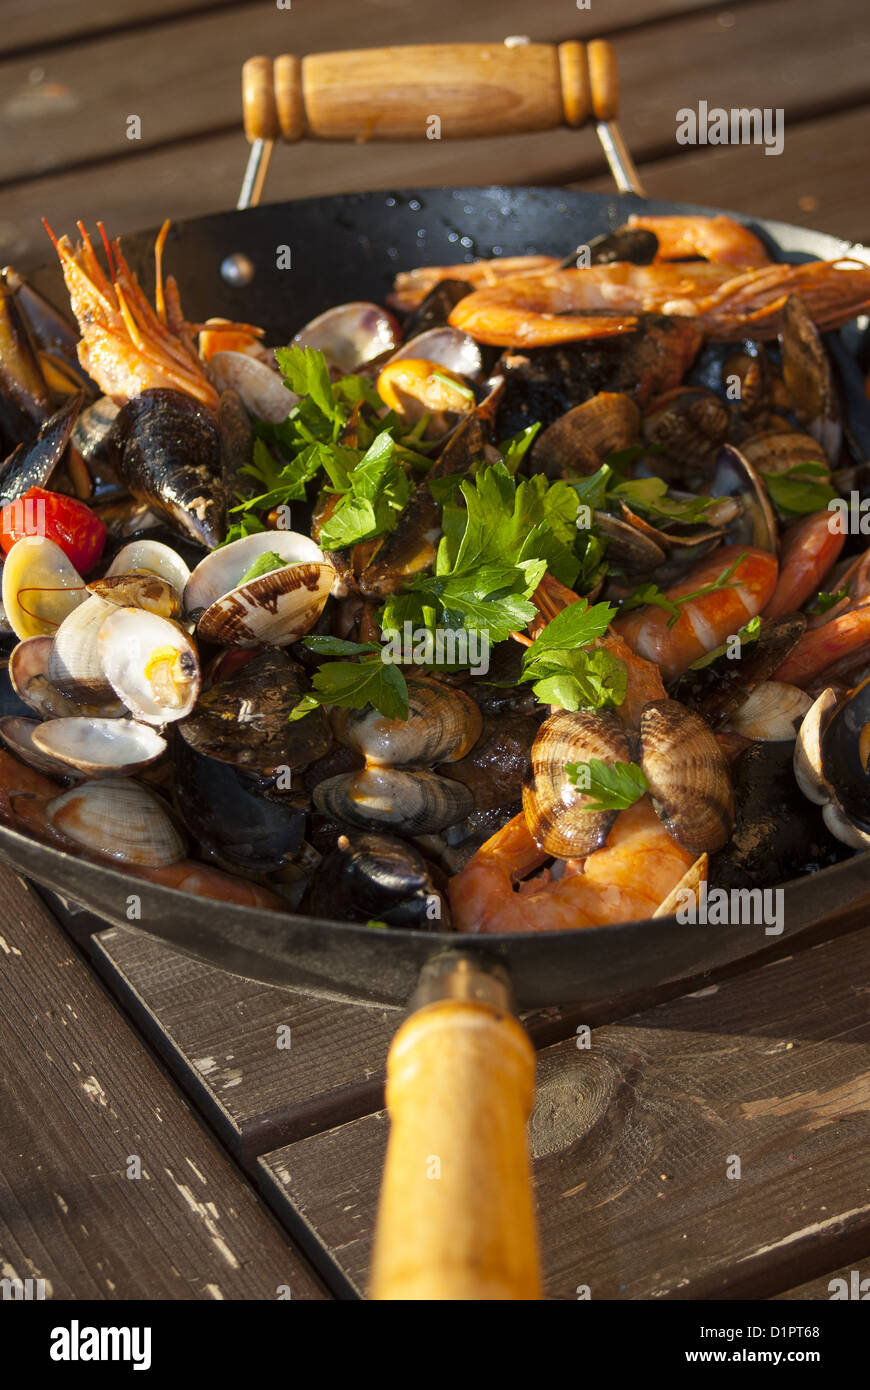 seafood sautè, a typical Italian soup with seafood sauteed in the pan Stock Photo